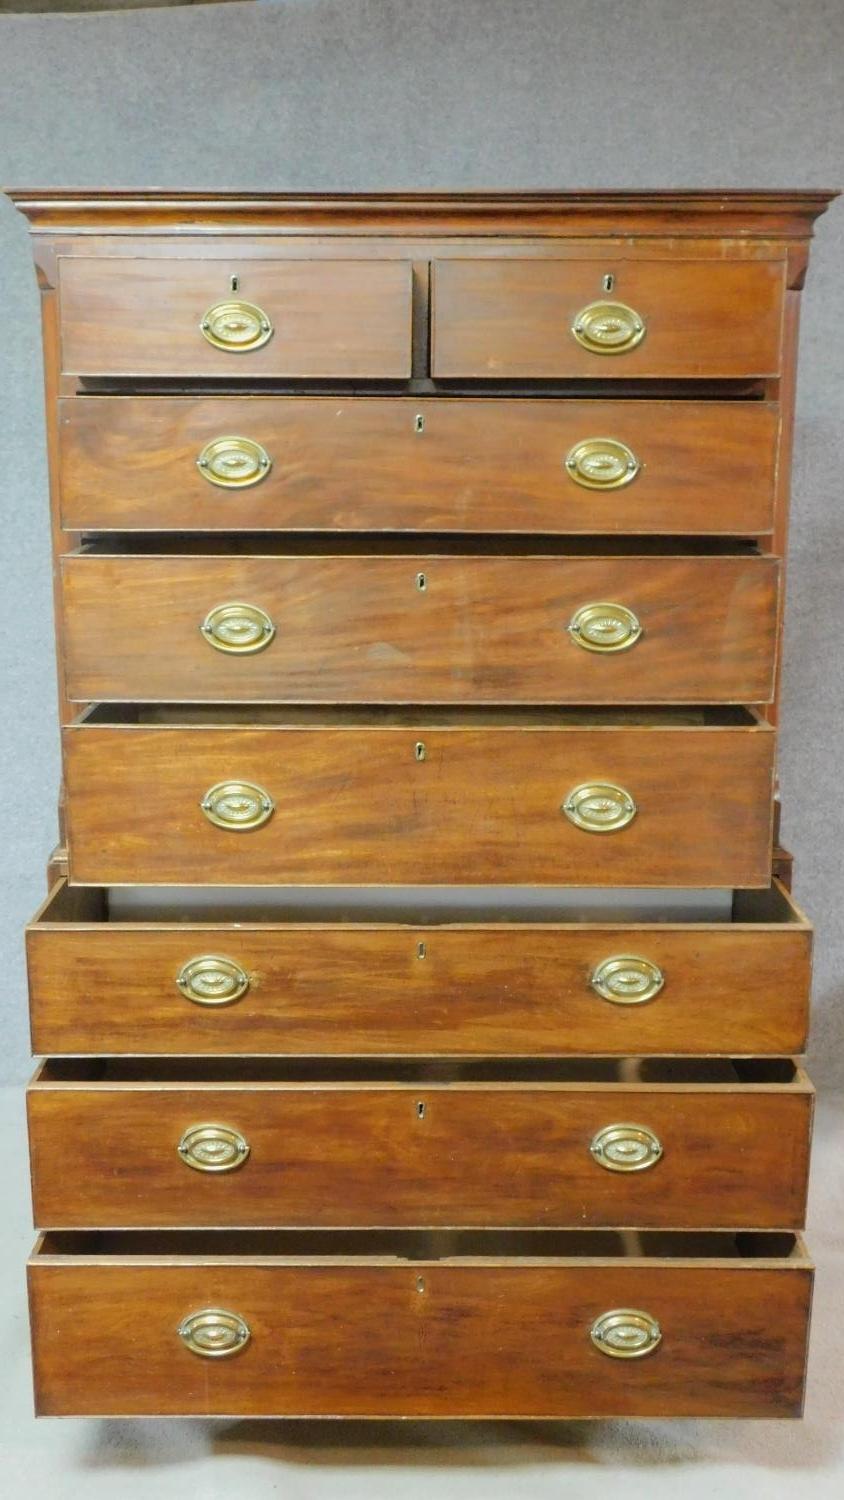 A Georgian mahogany chest on chest with satinwood and ebony inlay and brass plate handles on